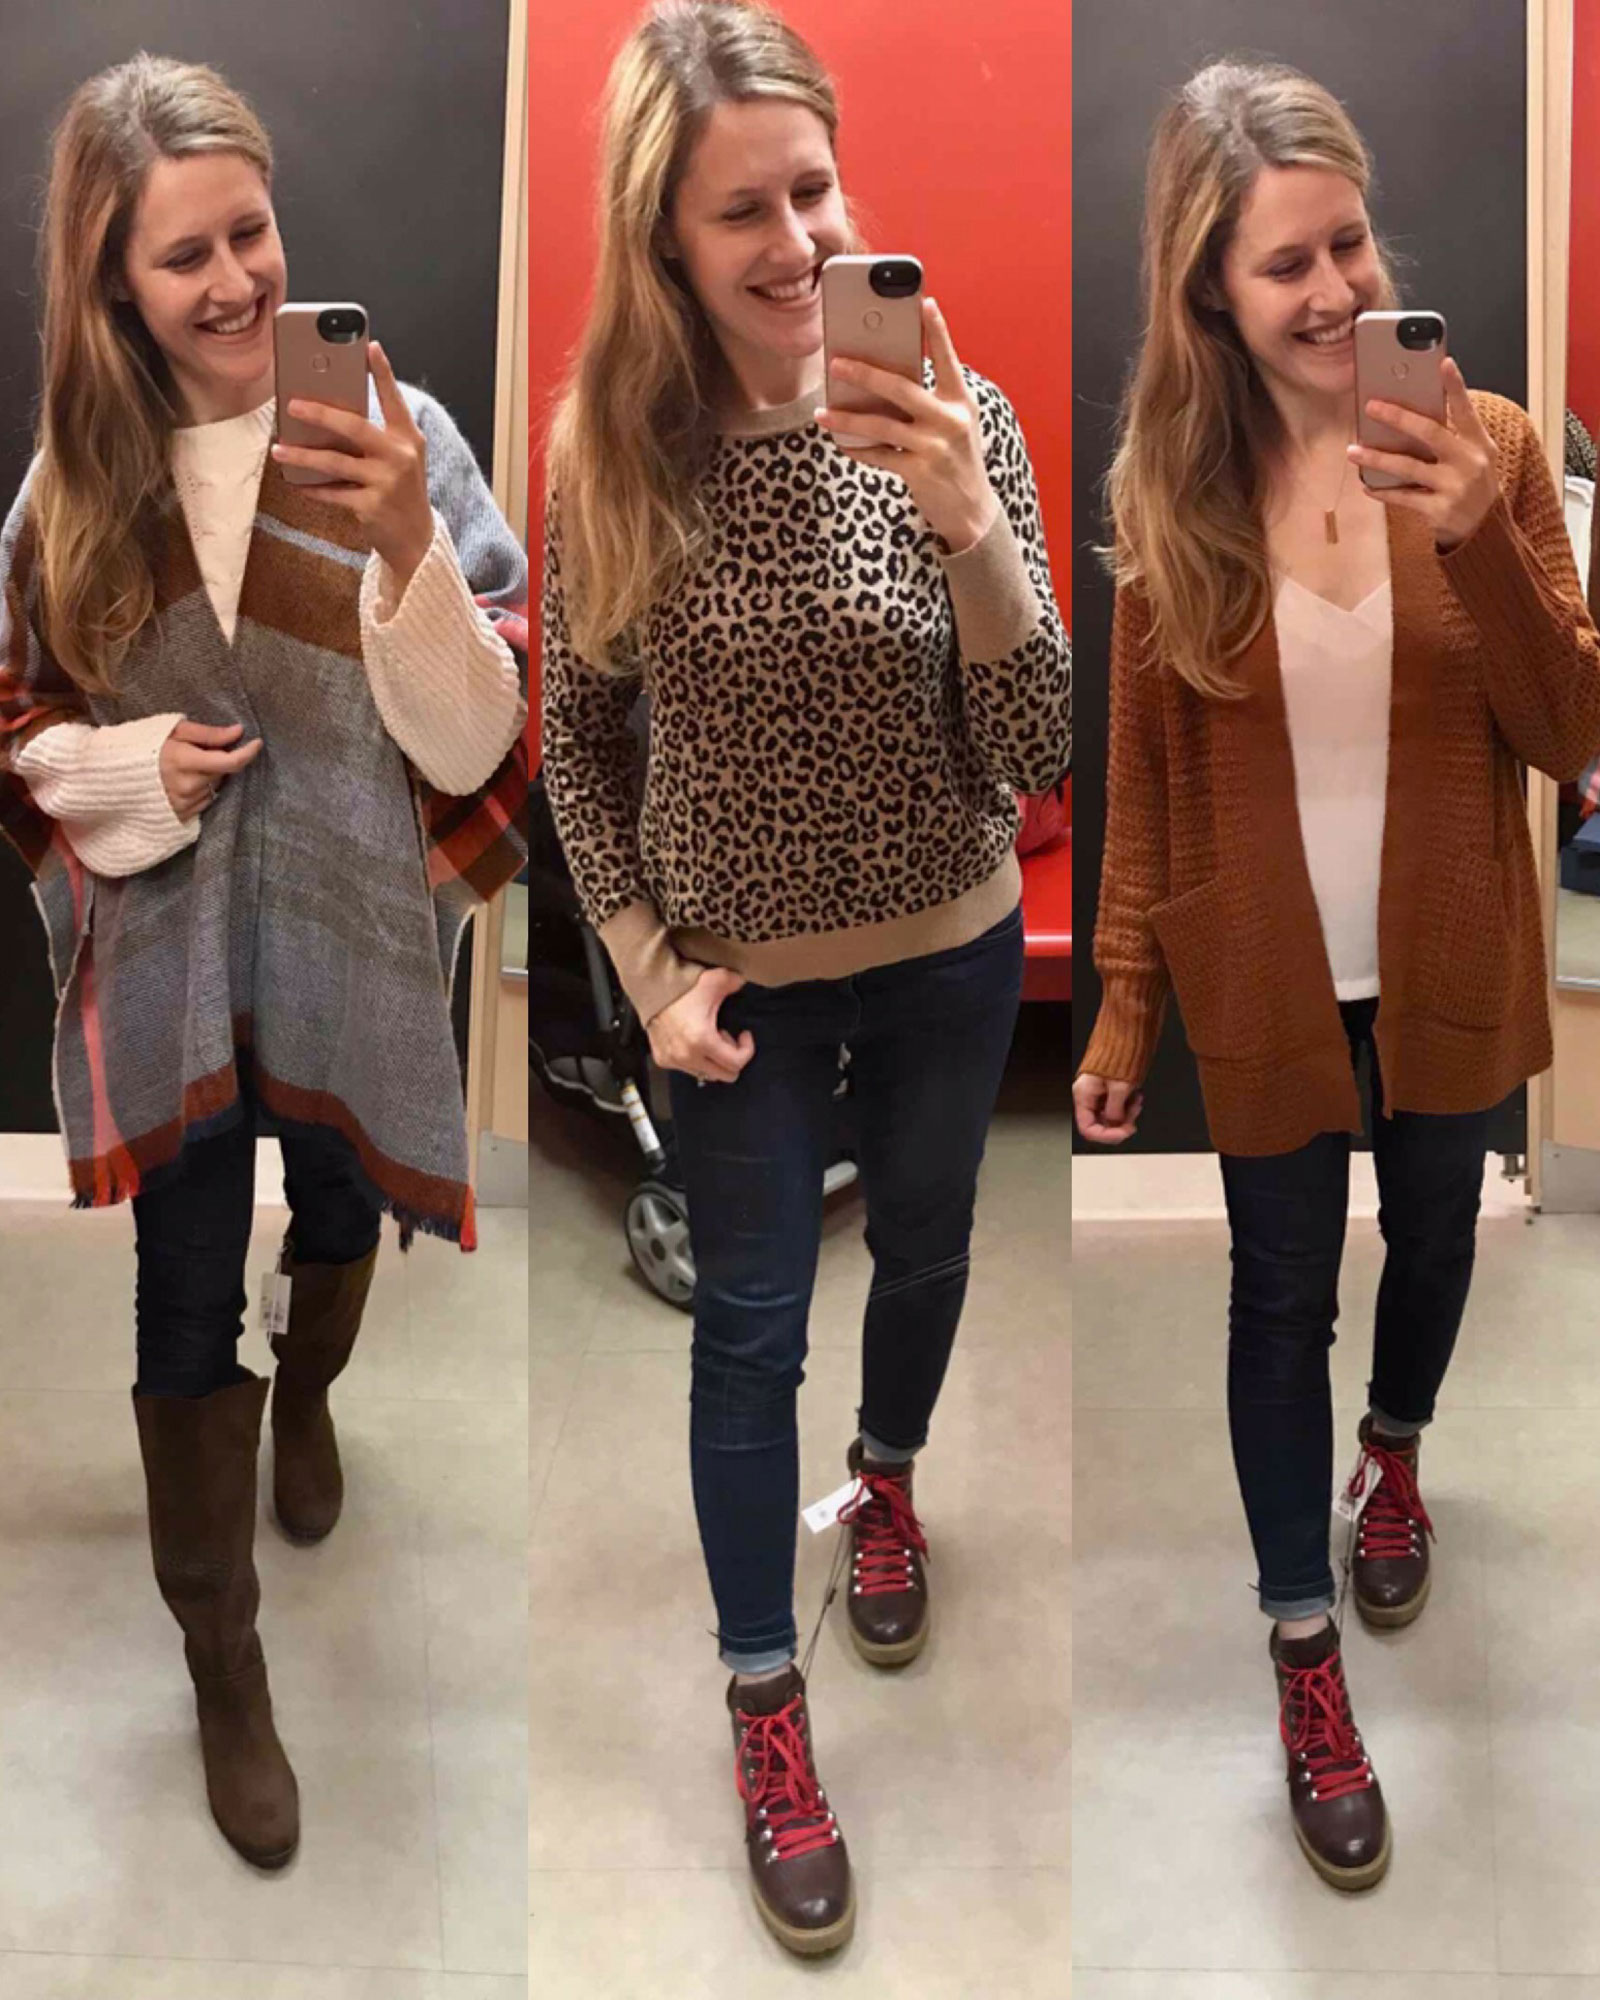 This blogger finds the best outfits at Target!